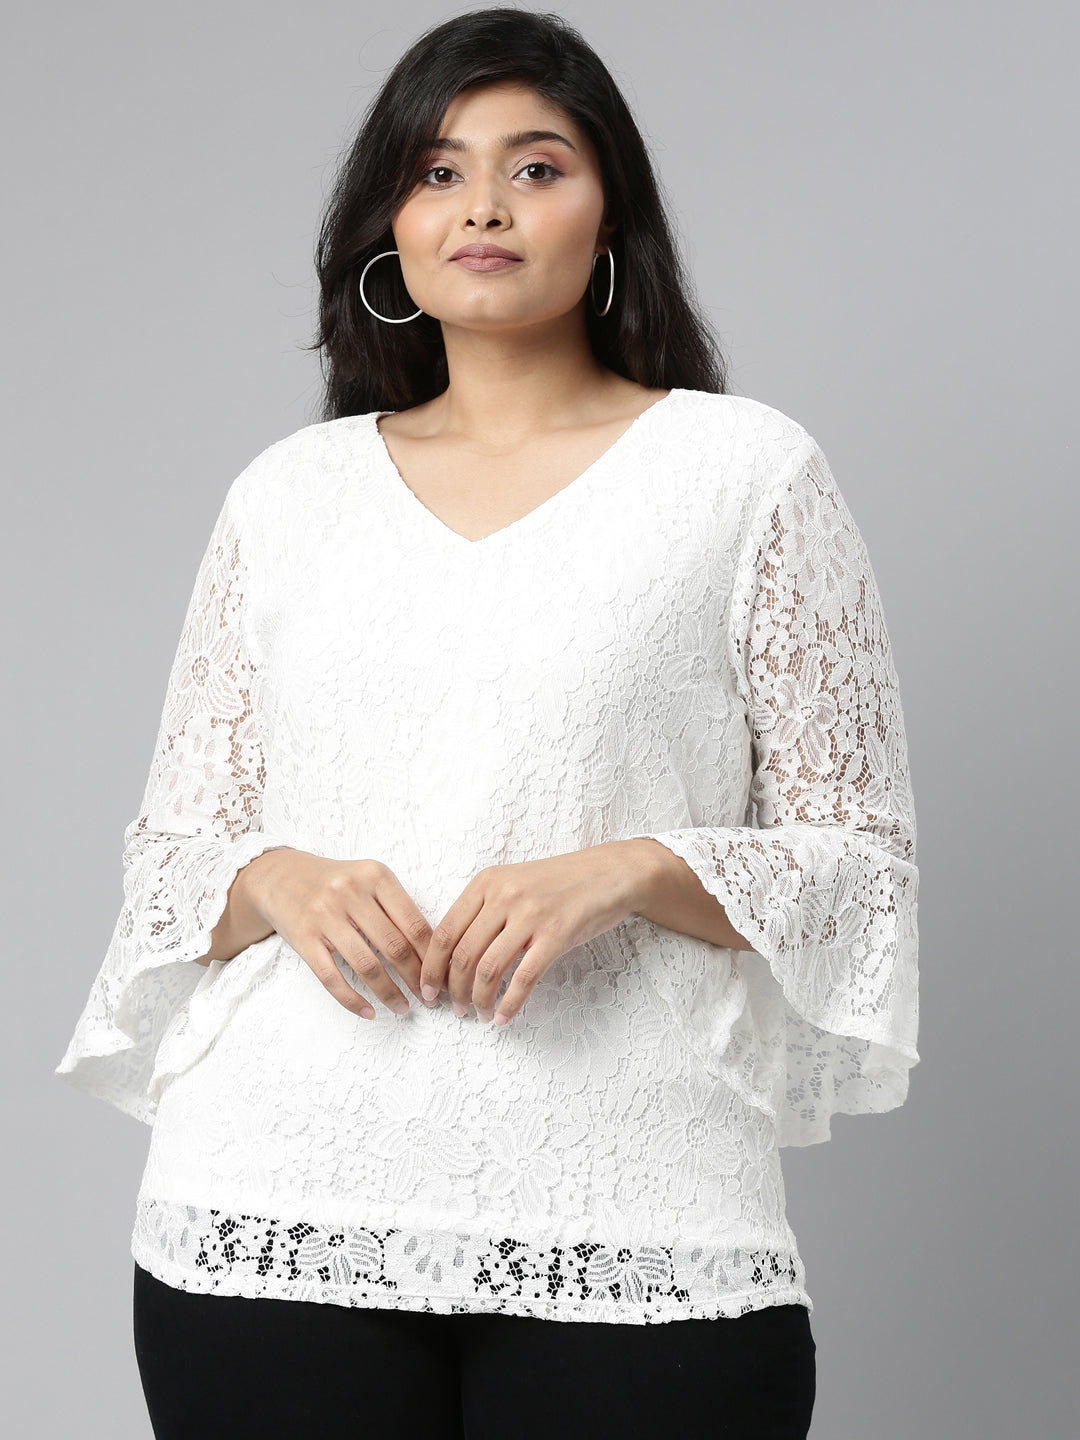 WHITE FLORAL LACE TOP